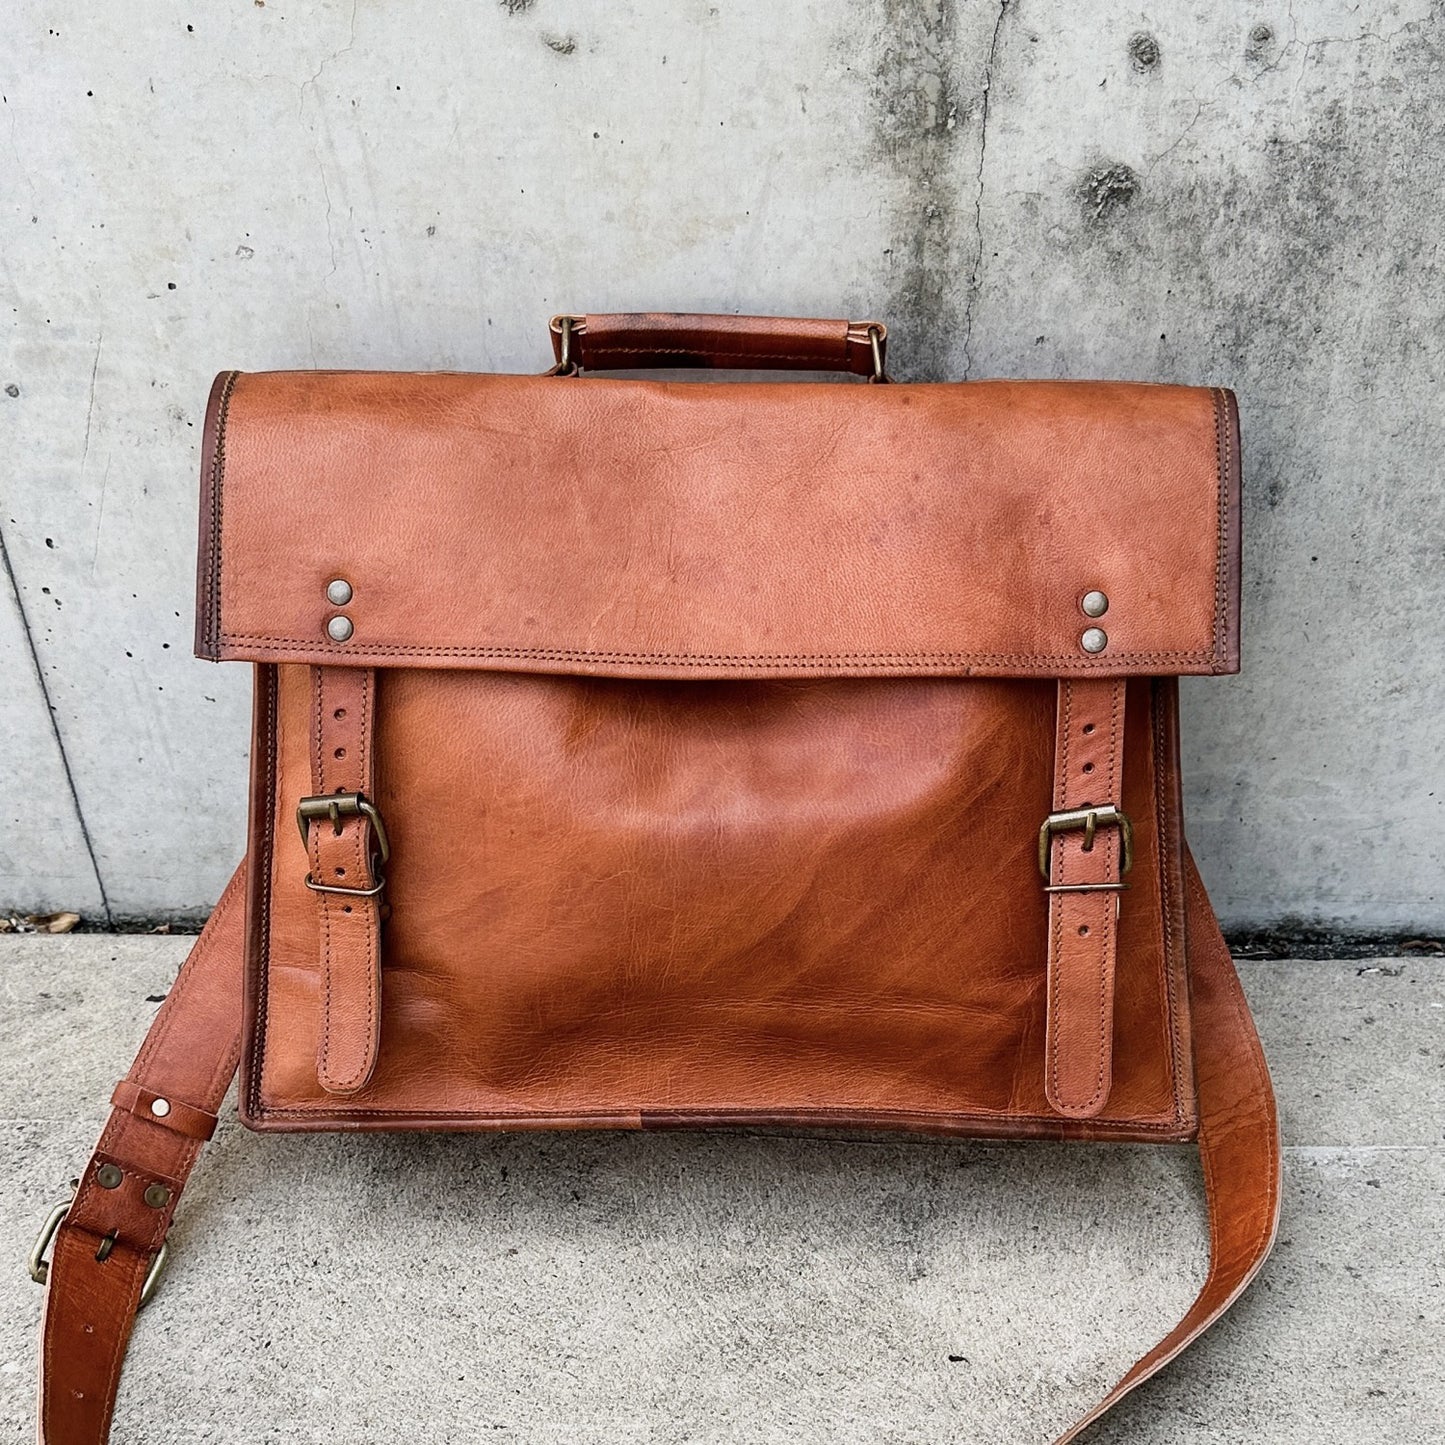 Billy Goat Designs - Leather Satchel - Large 15" (S15)